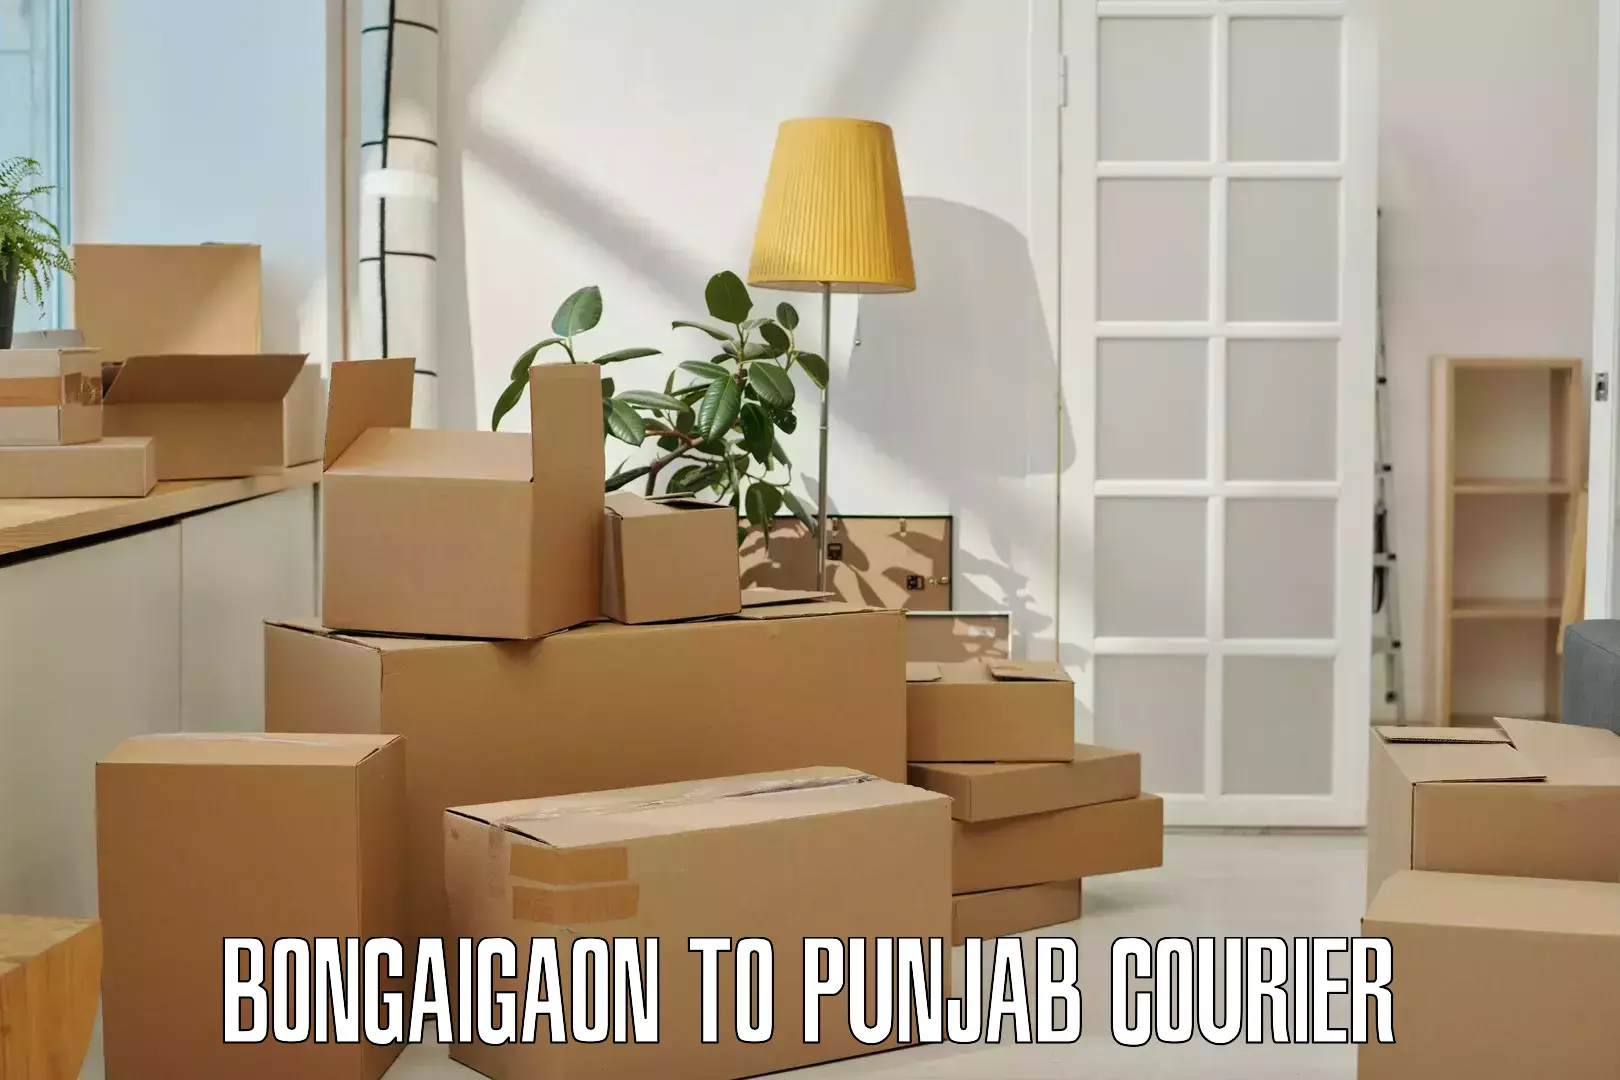 Parcel handling and care Bongaigaon to Beas